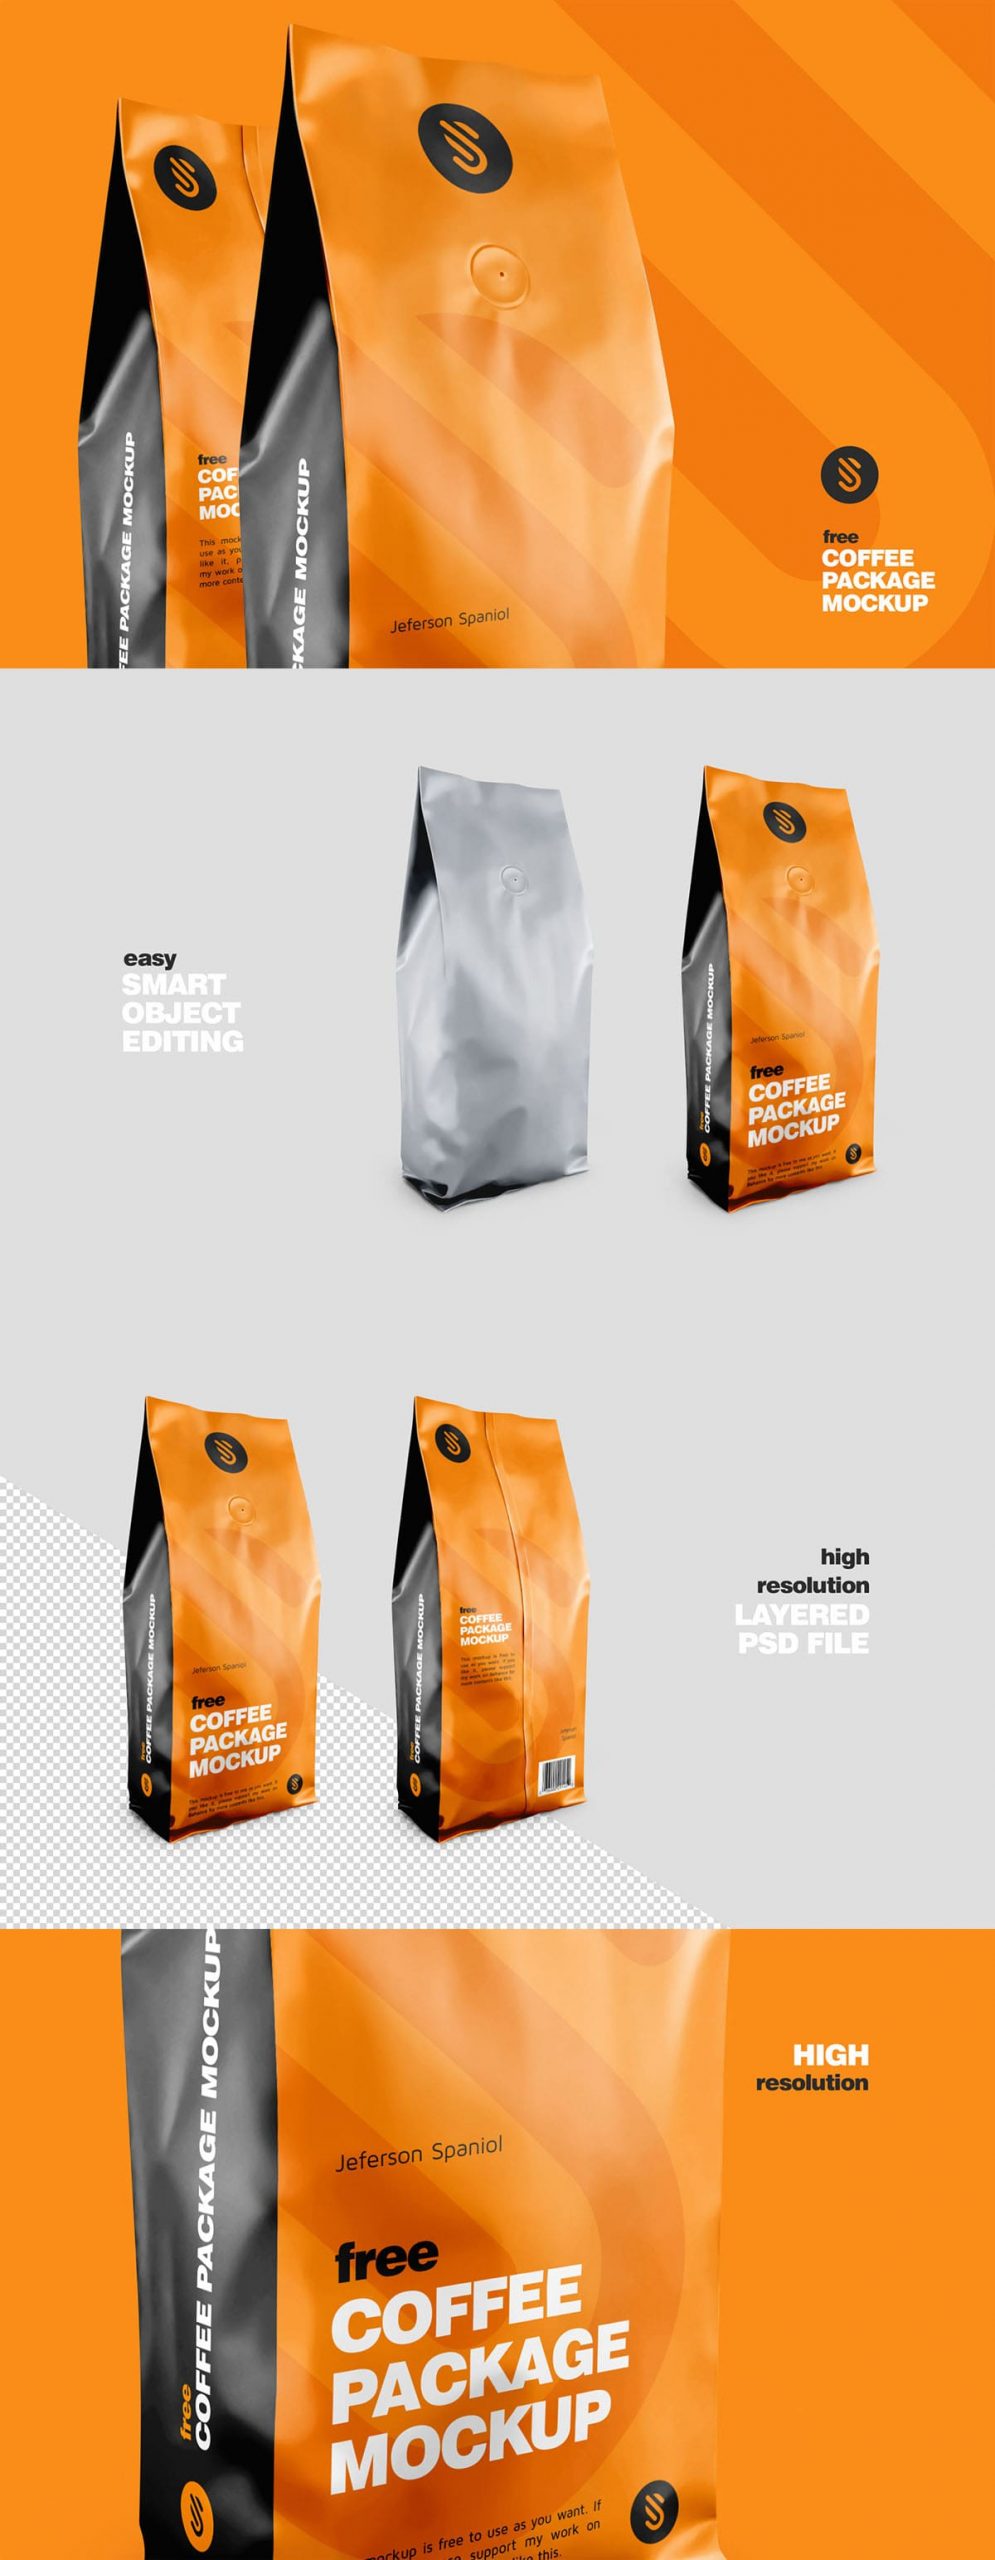 Download Free Coffee Package Mockup PSD - Find the Perfect Creative ...